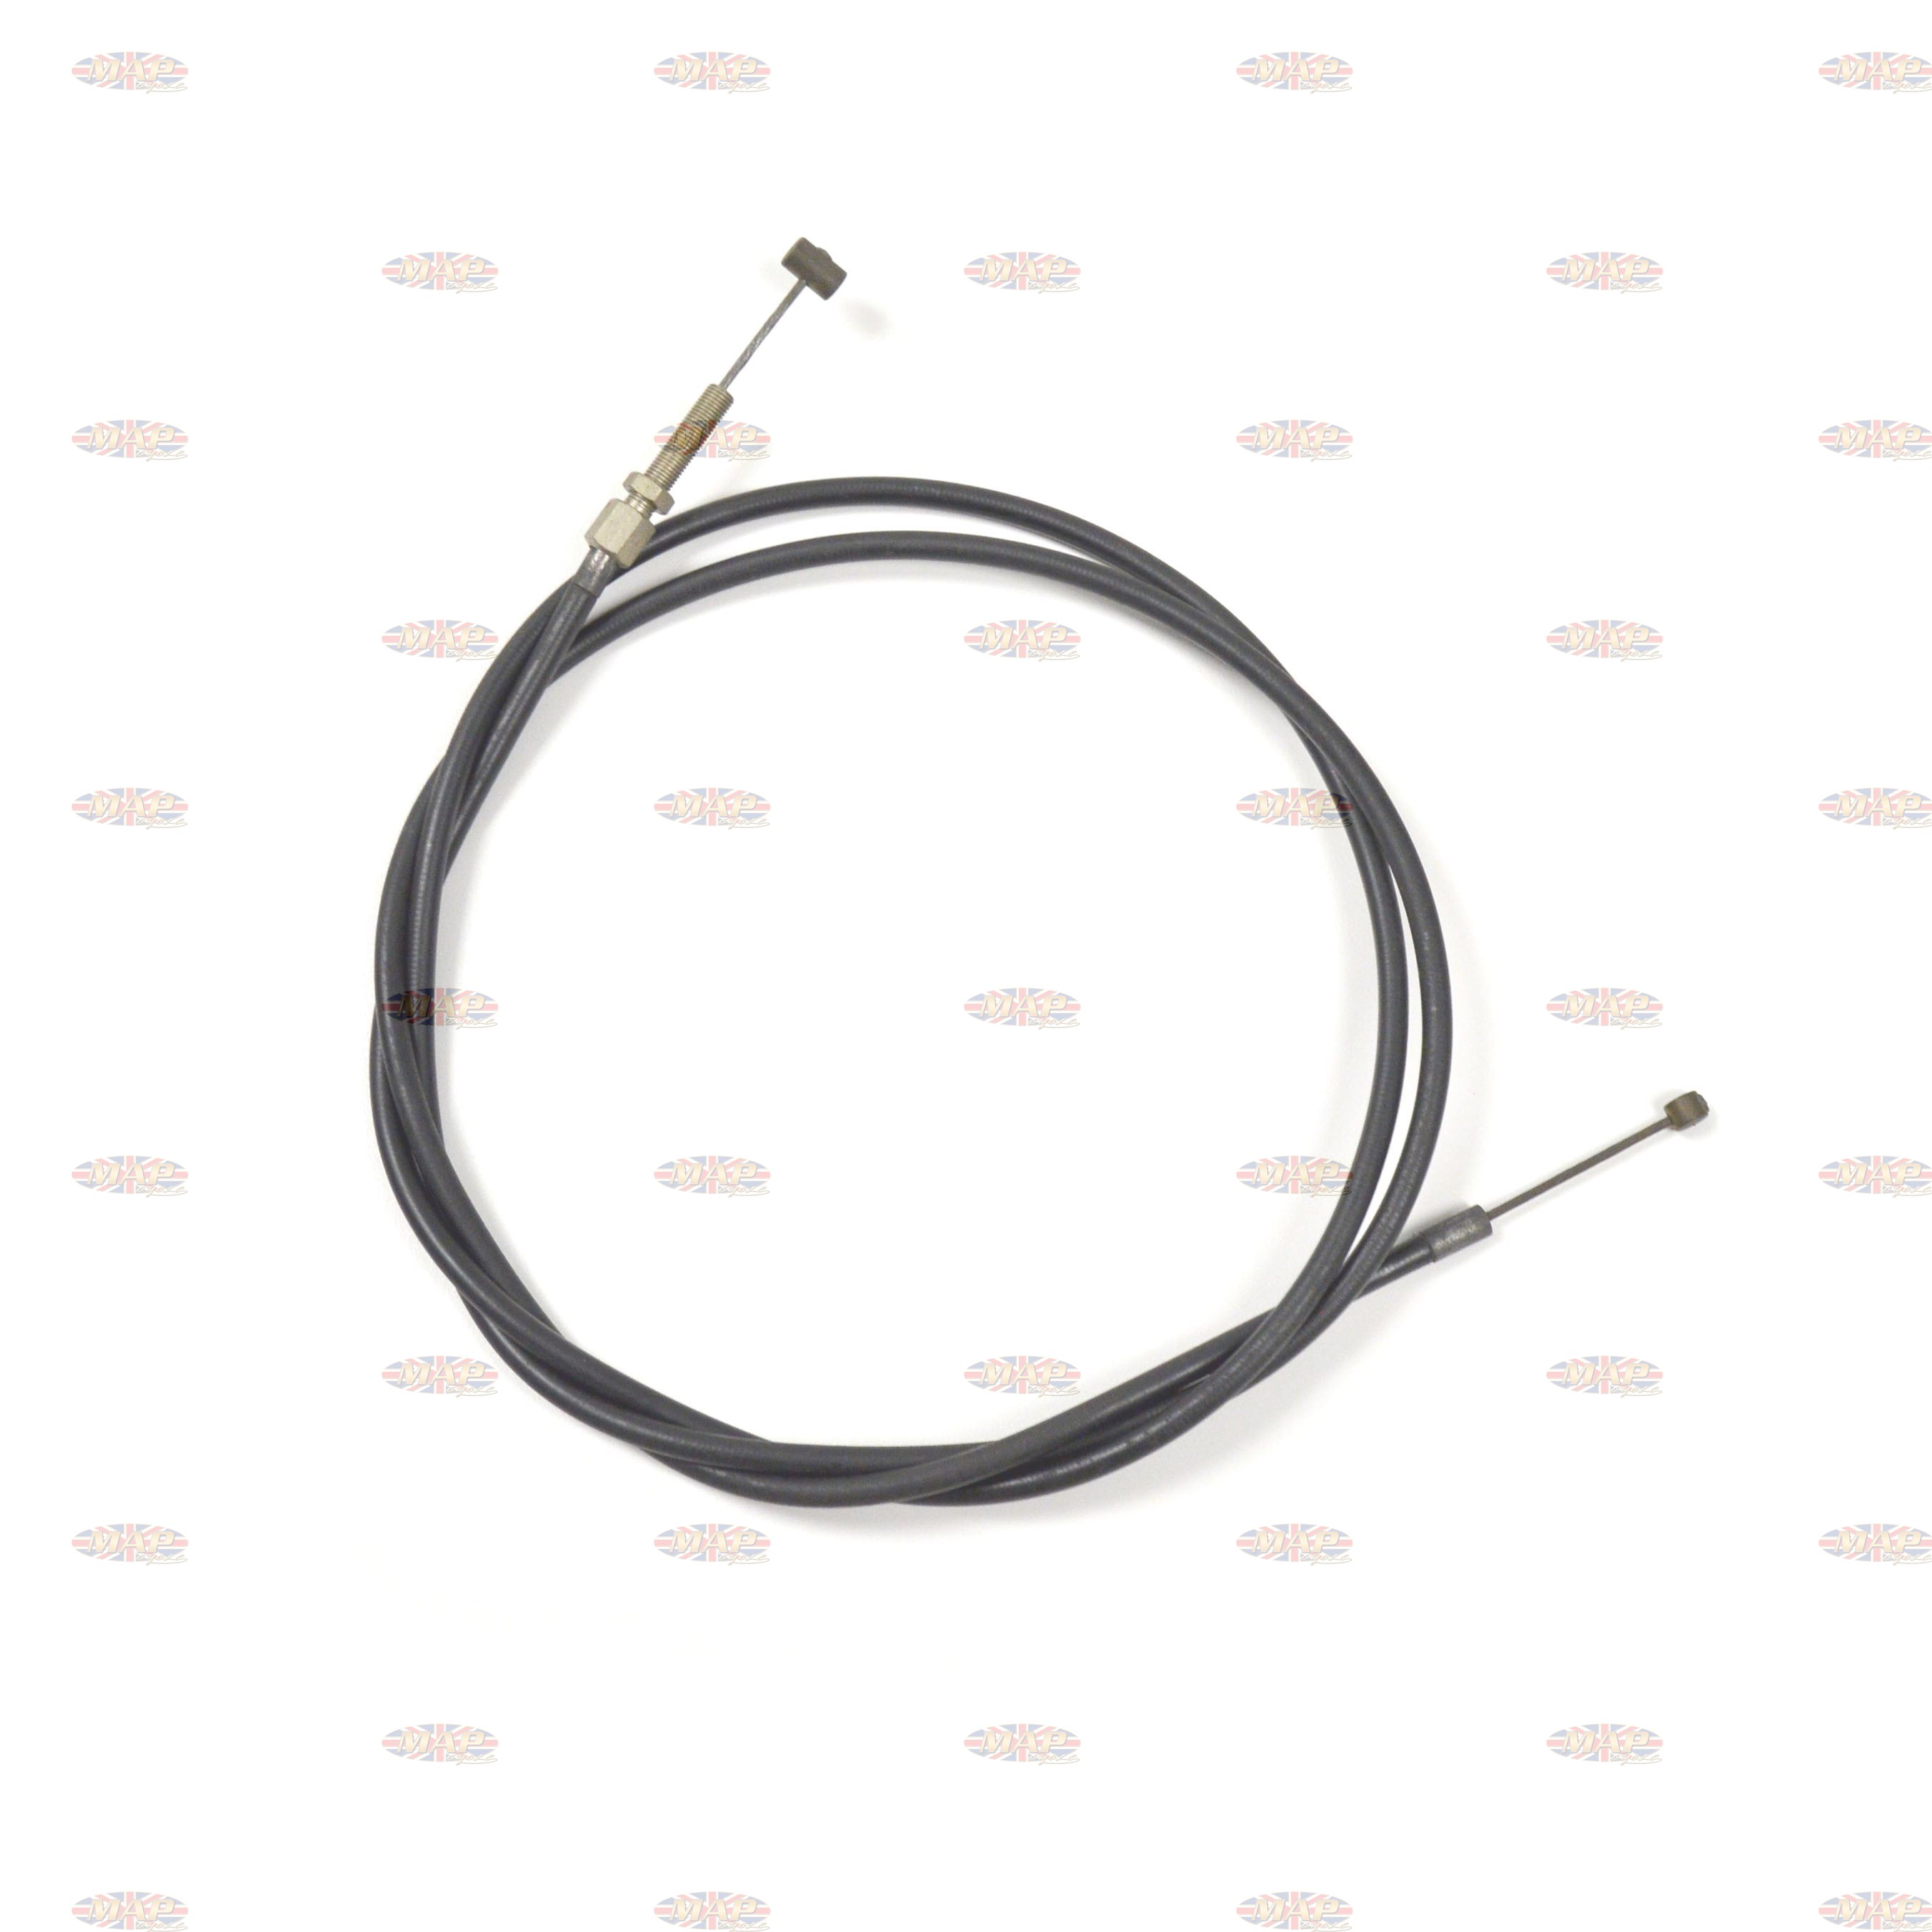 Triumph Trident T160 Throttle Cable Extra Long 60-4458/XL